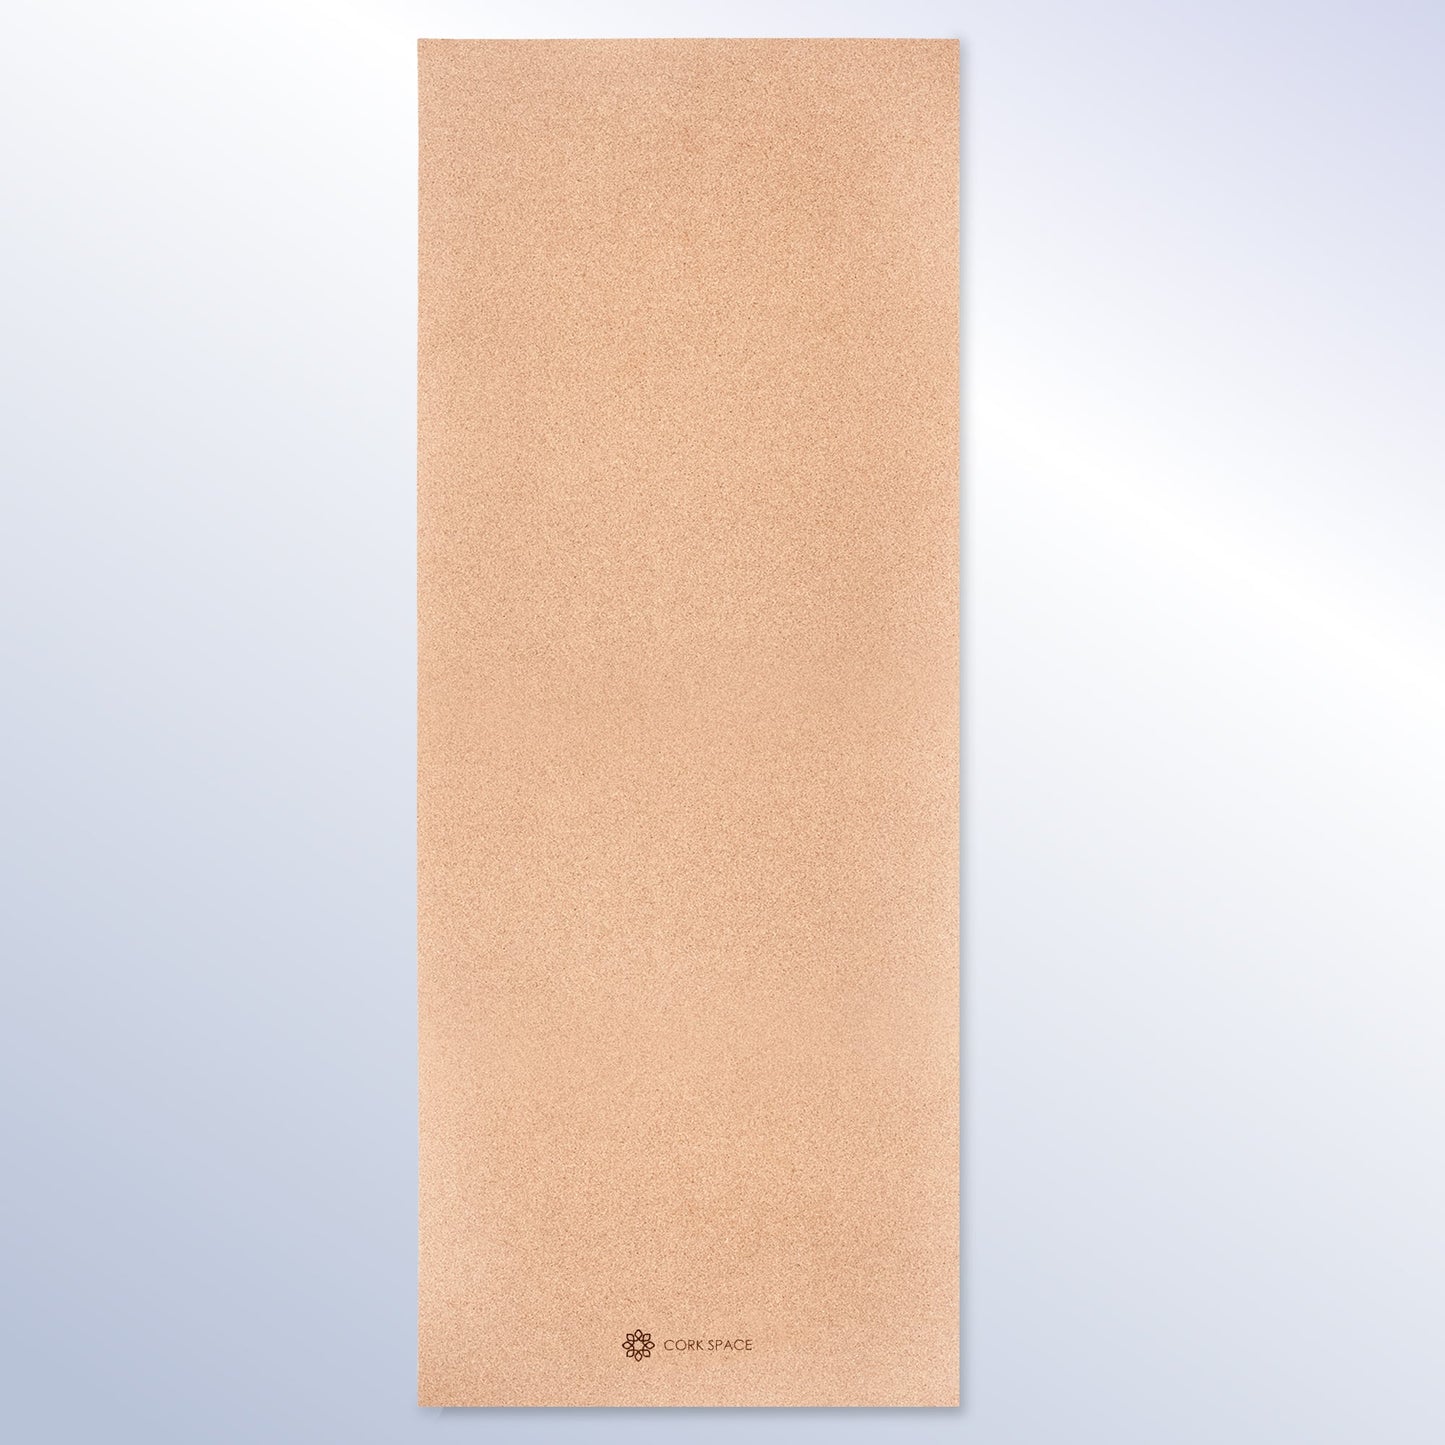 Large Cork Yoga Mat - More Space To Practice